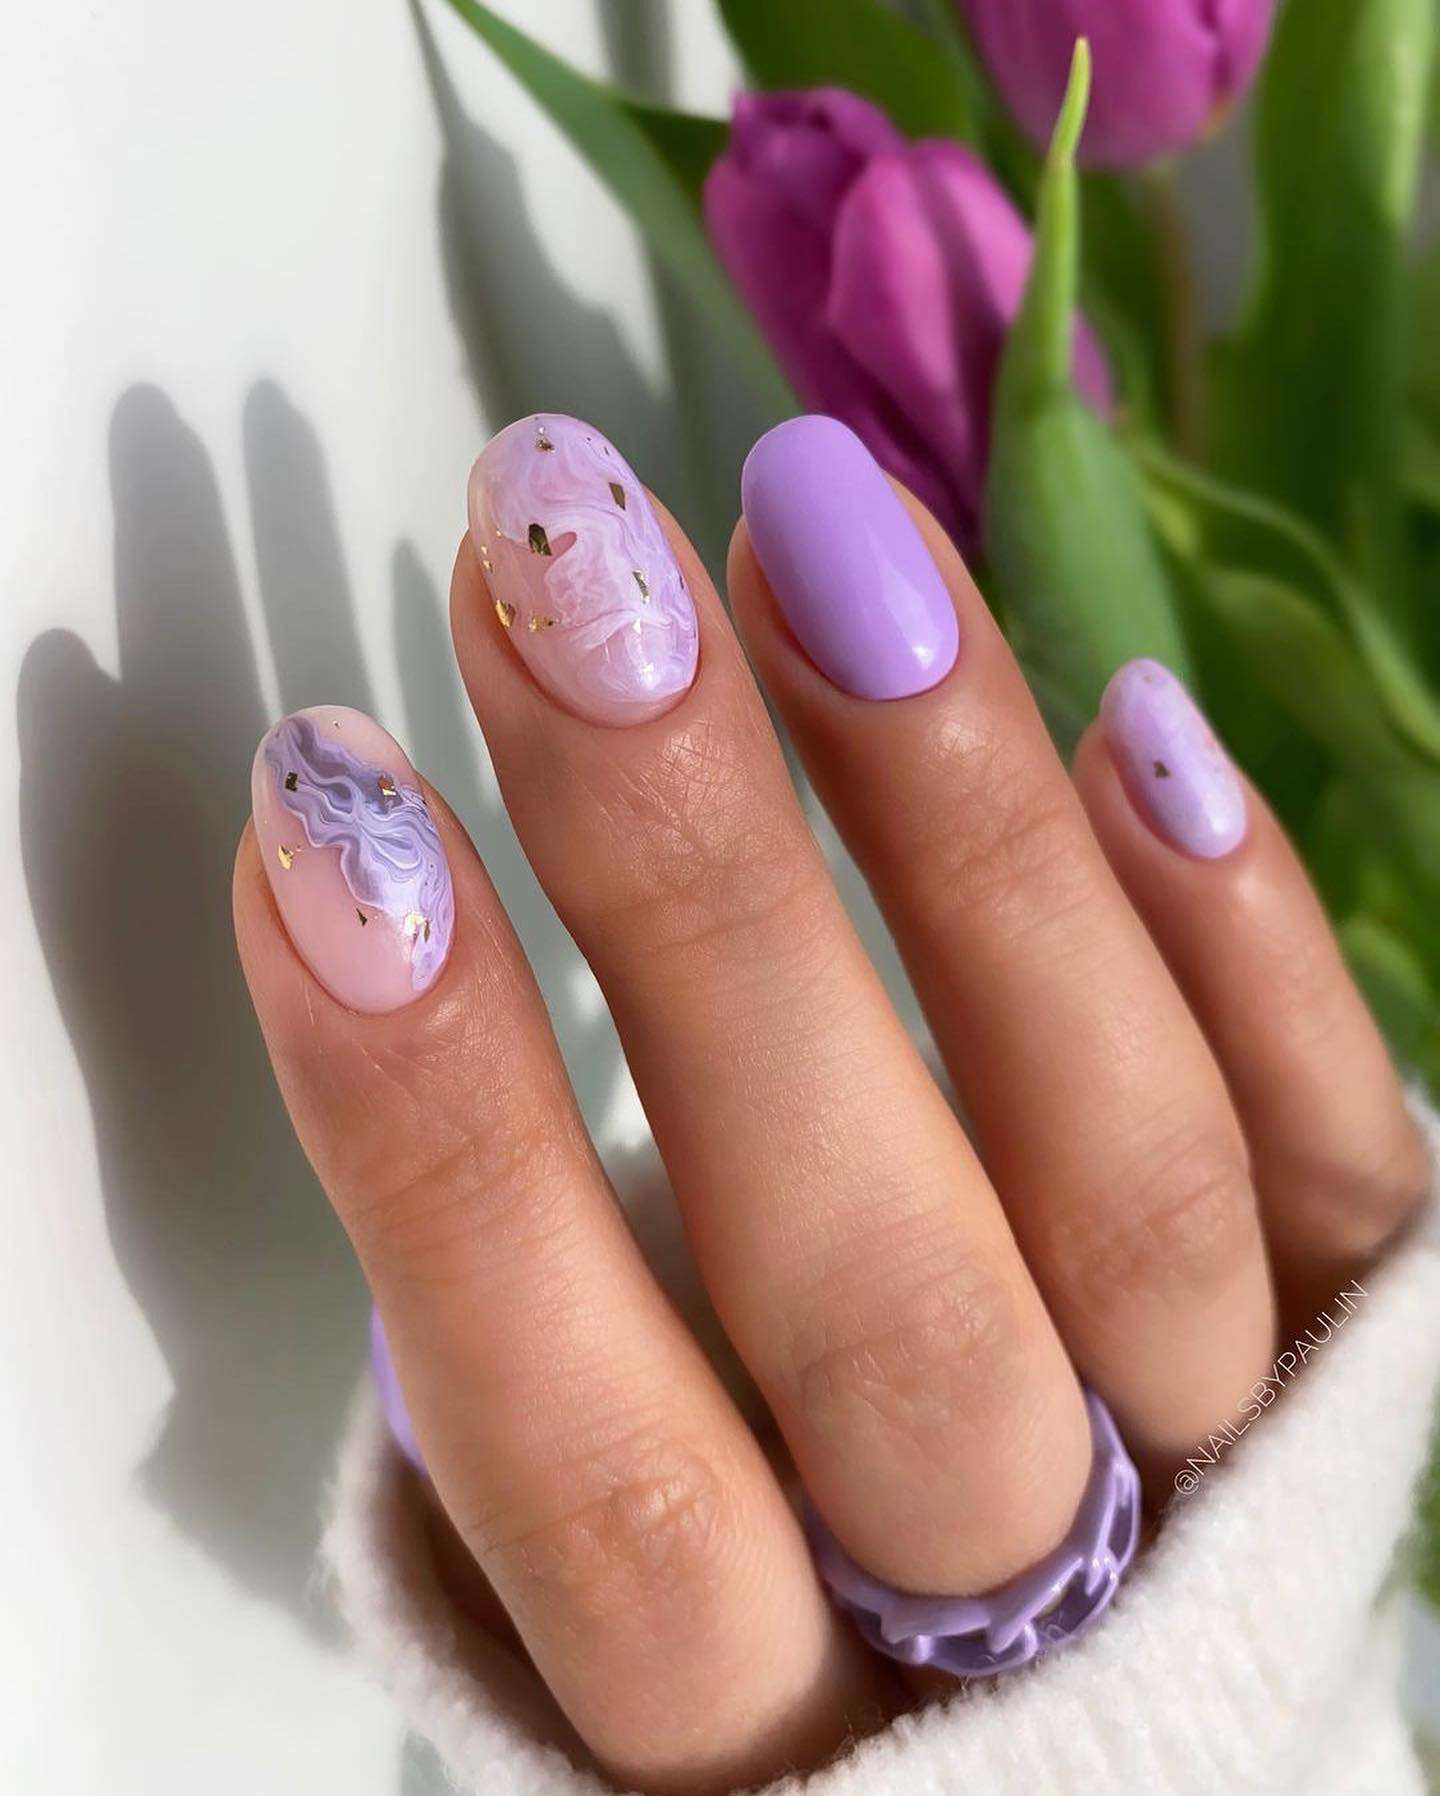 35 Nail Designs For 2022 You’ll Want To Try Immediately images 20